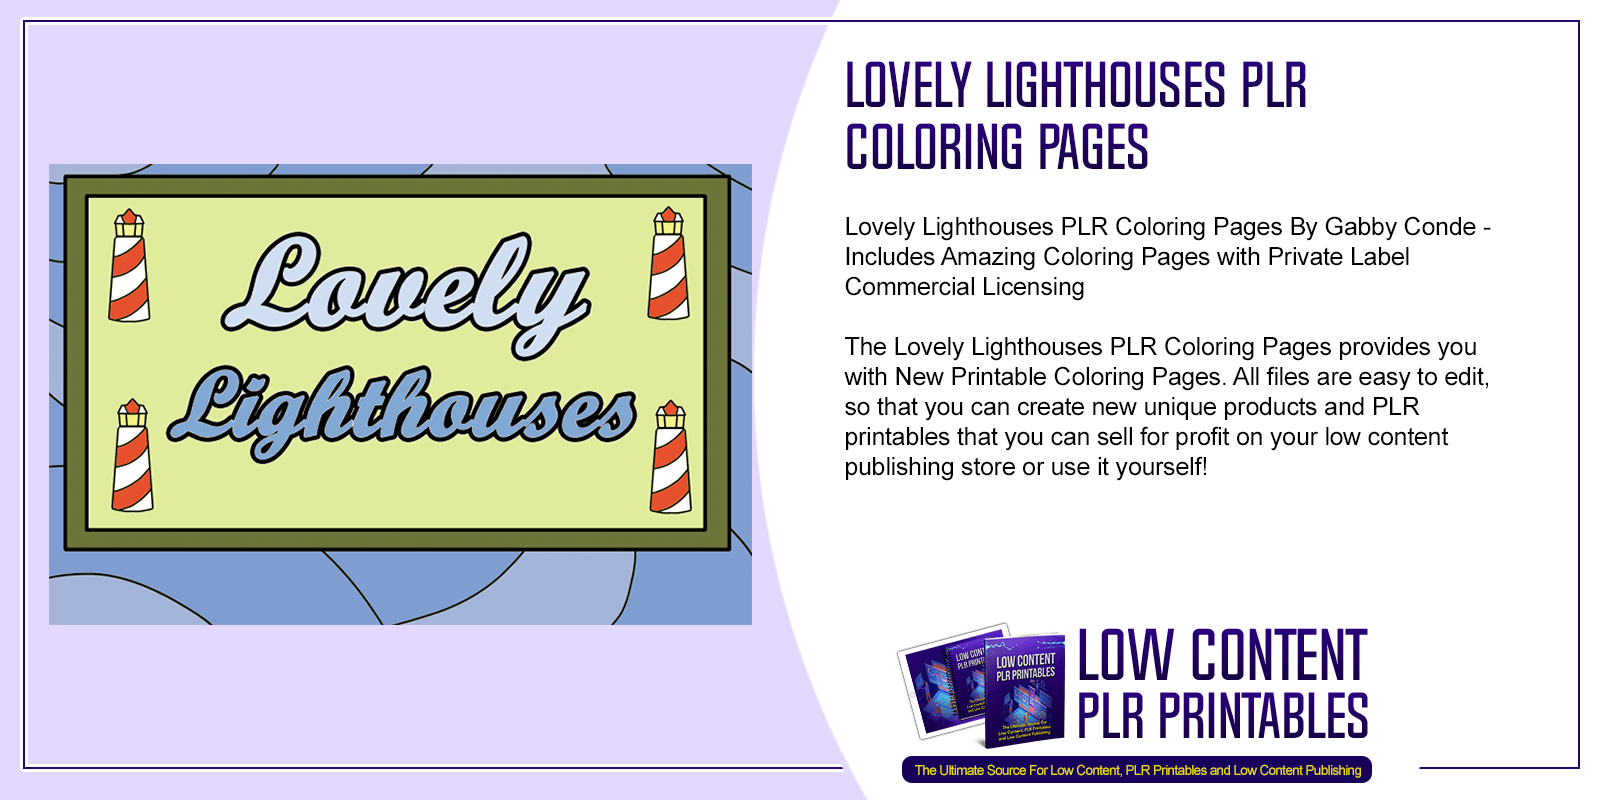 Lovely Lighthouses PLR Coloring Pages